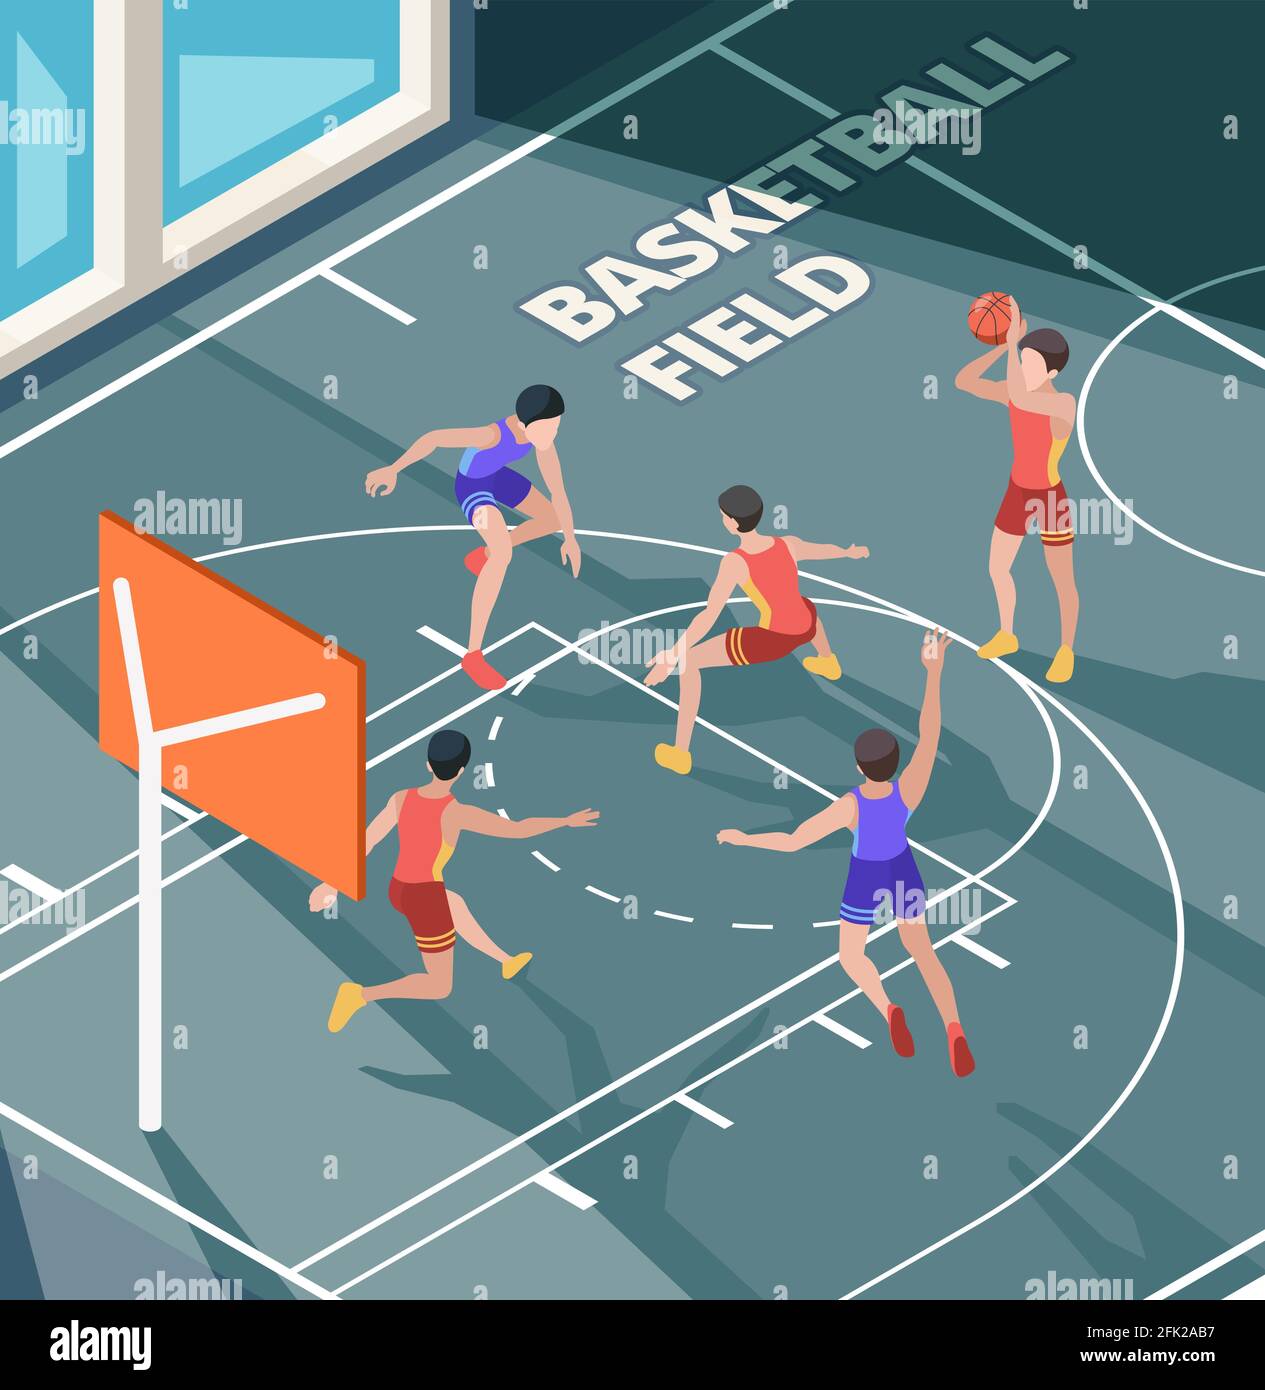 Basketball field. Sport club active game players in action poses orange ball on court or floor vector isometric characters Stock Vector